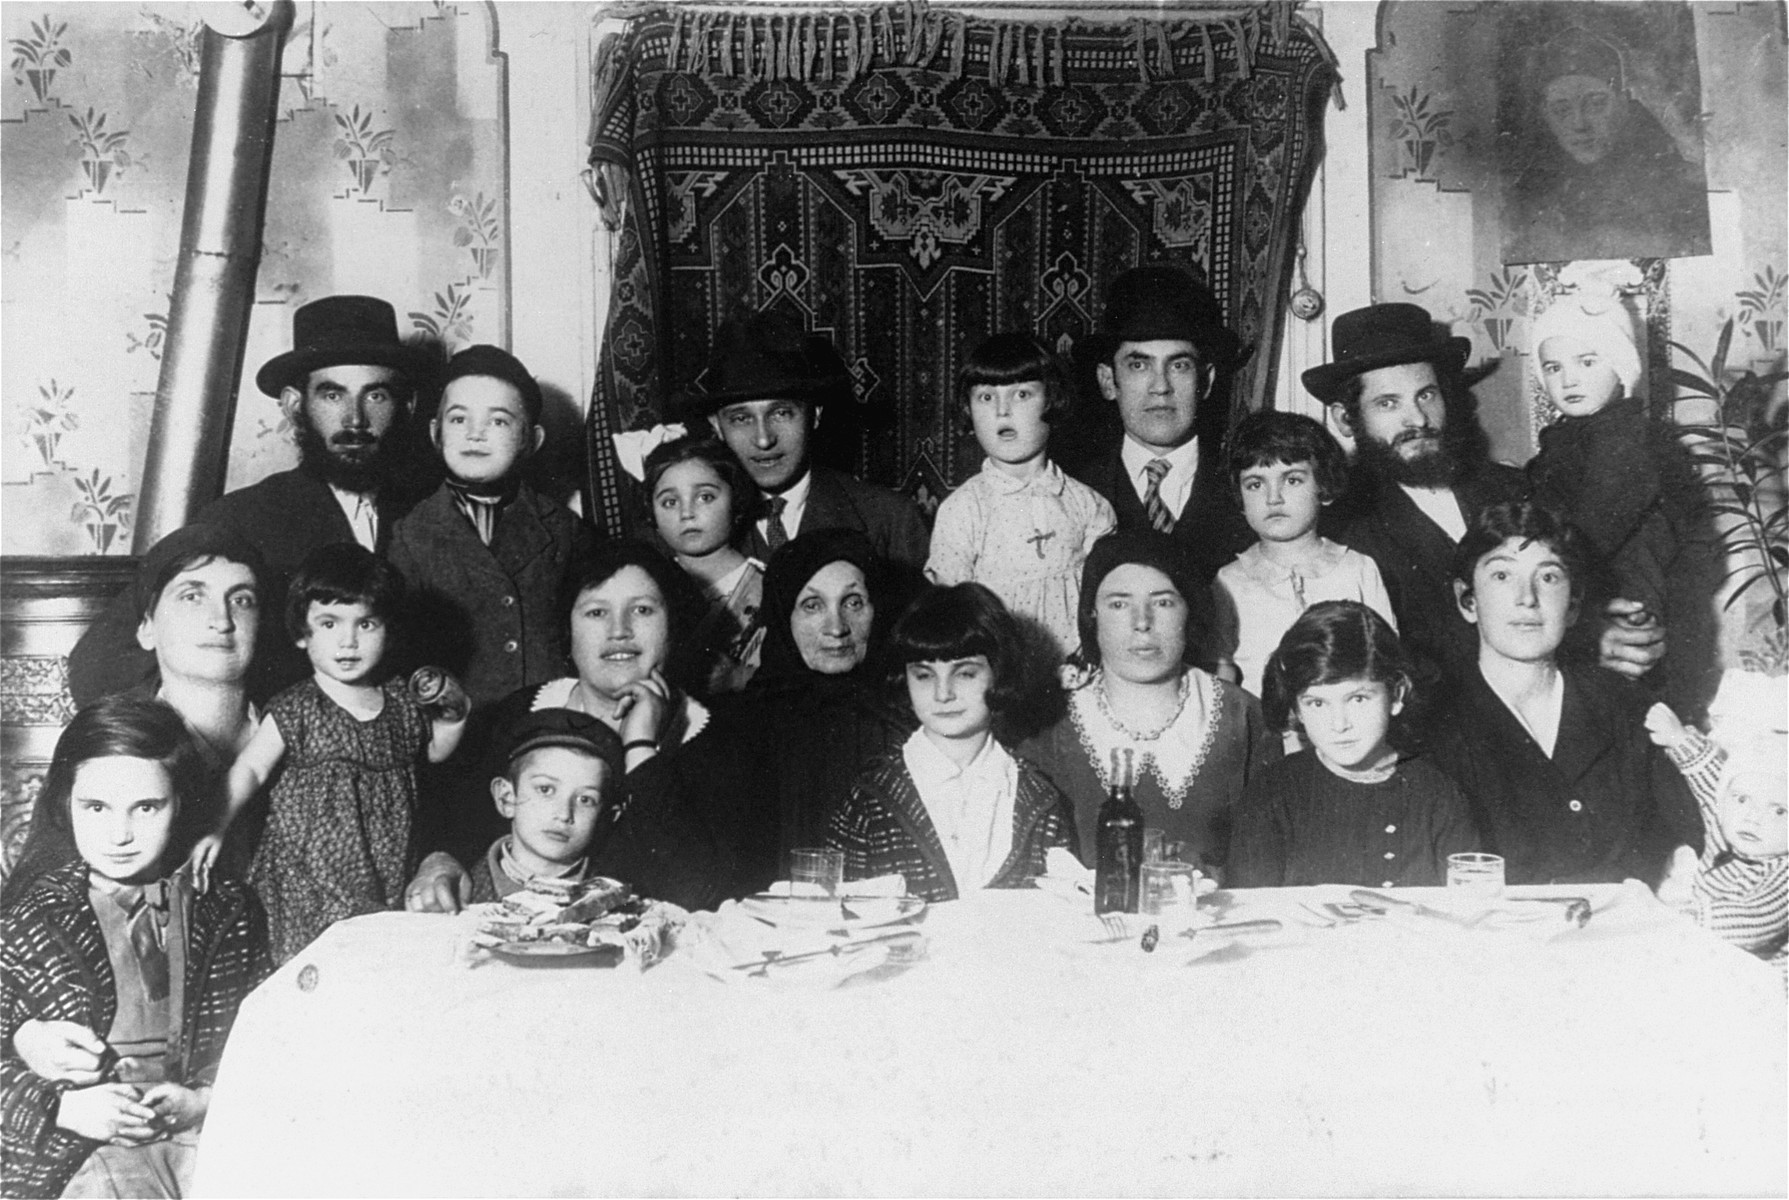 Group portrait of the family of Elizabeth Ehrlich seated around the family table in Mukachevo. 

Among those pictured is Elizabeth Ehrlich (later Roth) standing in the middle of the back row in a light dress, and Rella Ehrlich (front row, second from the right).  Elizabeth was born March 26, 1926 in Mukachevo, and in 1944 was confined to the ghetto there before being deported with her family to Auschwitz.  She was later transferred to a camp in Bydogszcz, Poland, and from there to the Stutthof concentration camp.